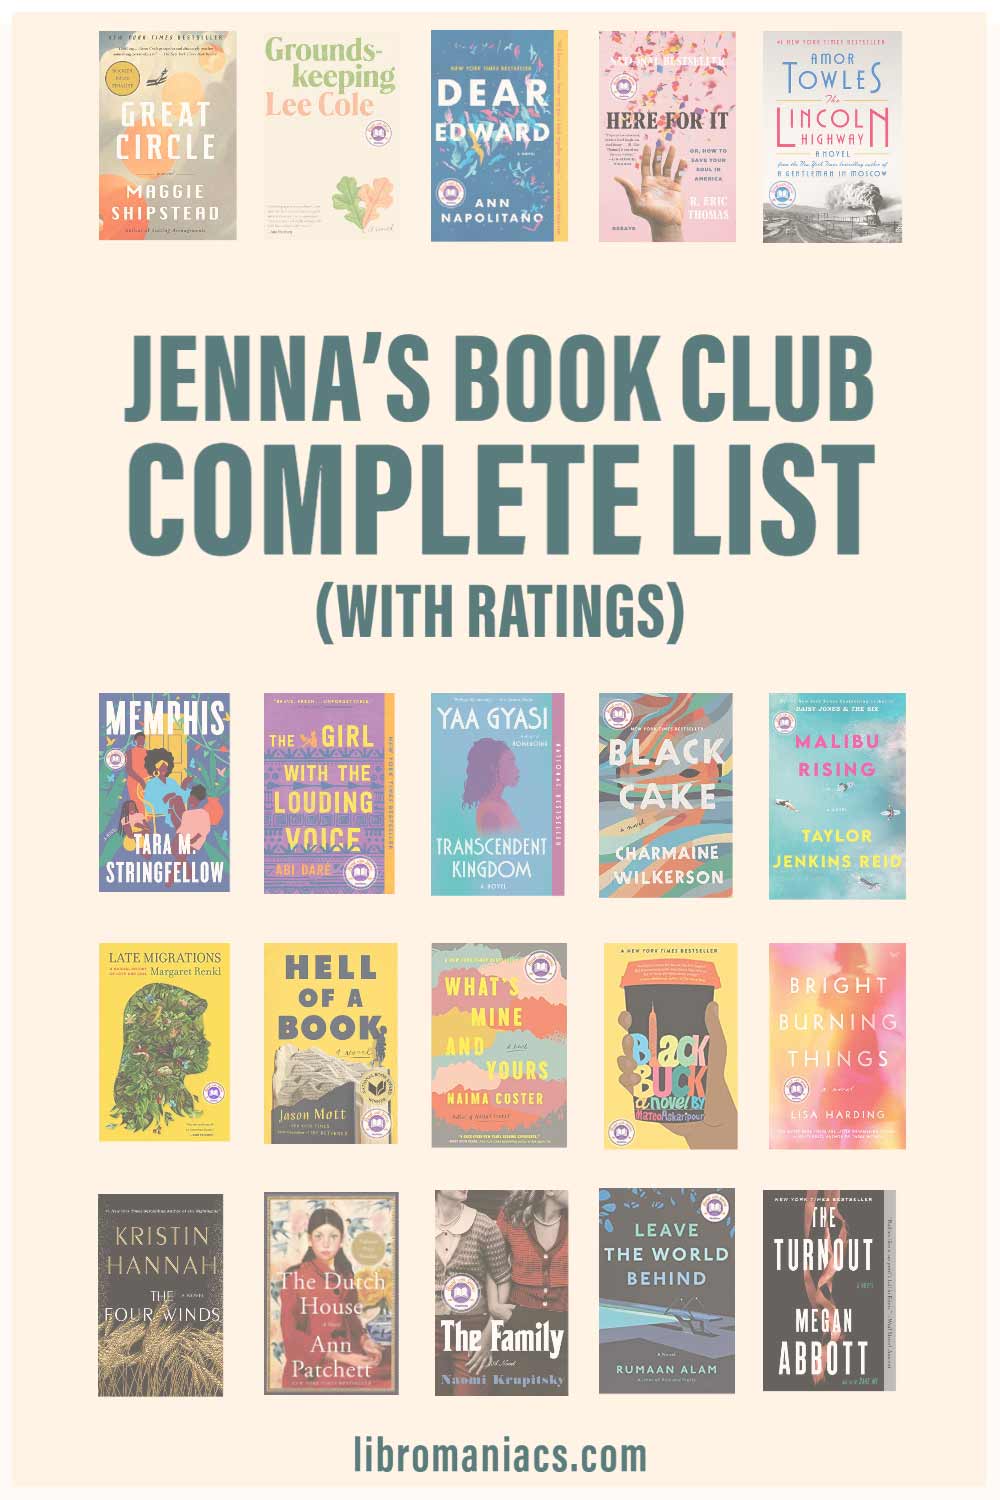 Jenna's book club complete list with ratings